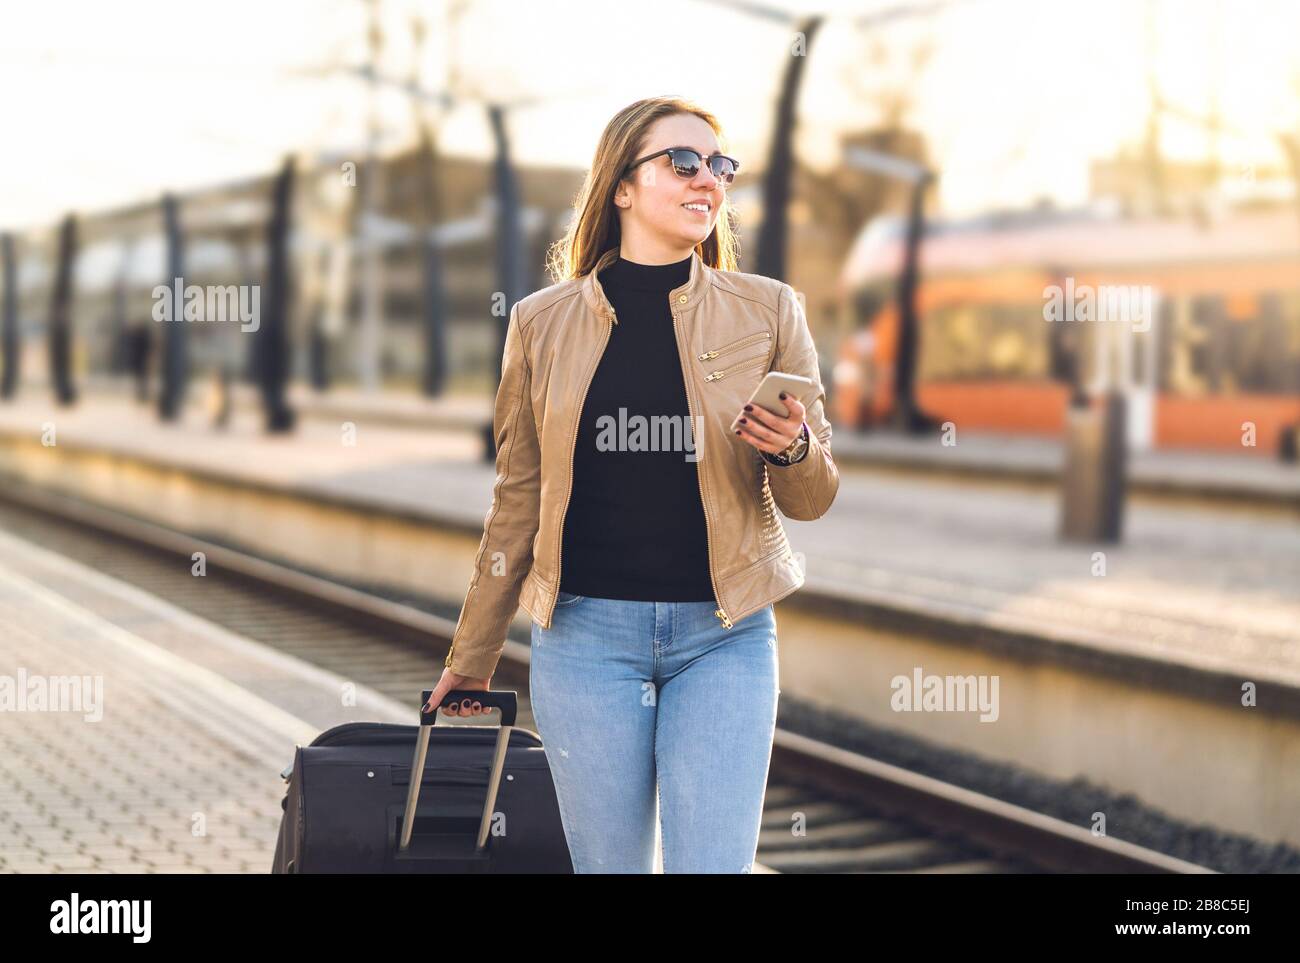 Woman walking in train station with smartphone. Happy female traveler pulling suitcase and baggage in platform while holding mobile phone. Stock Photo